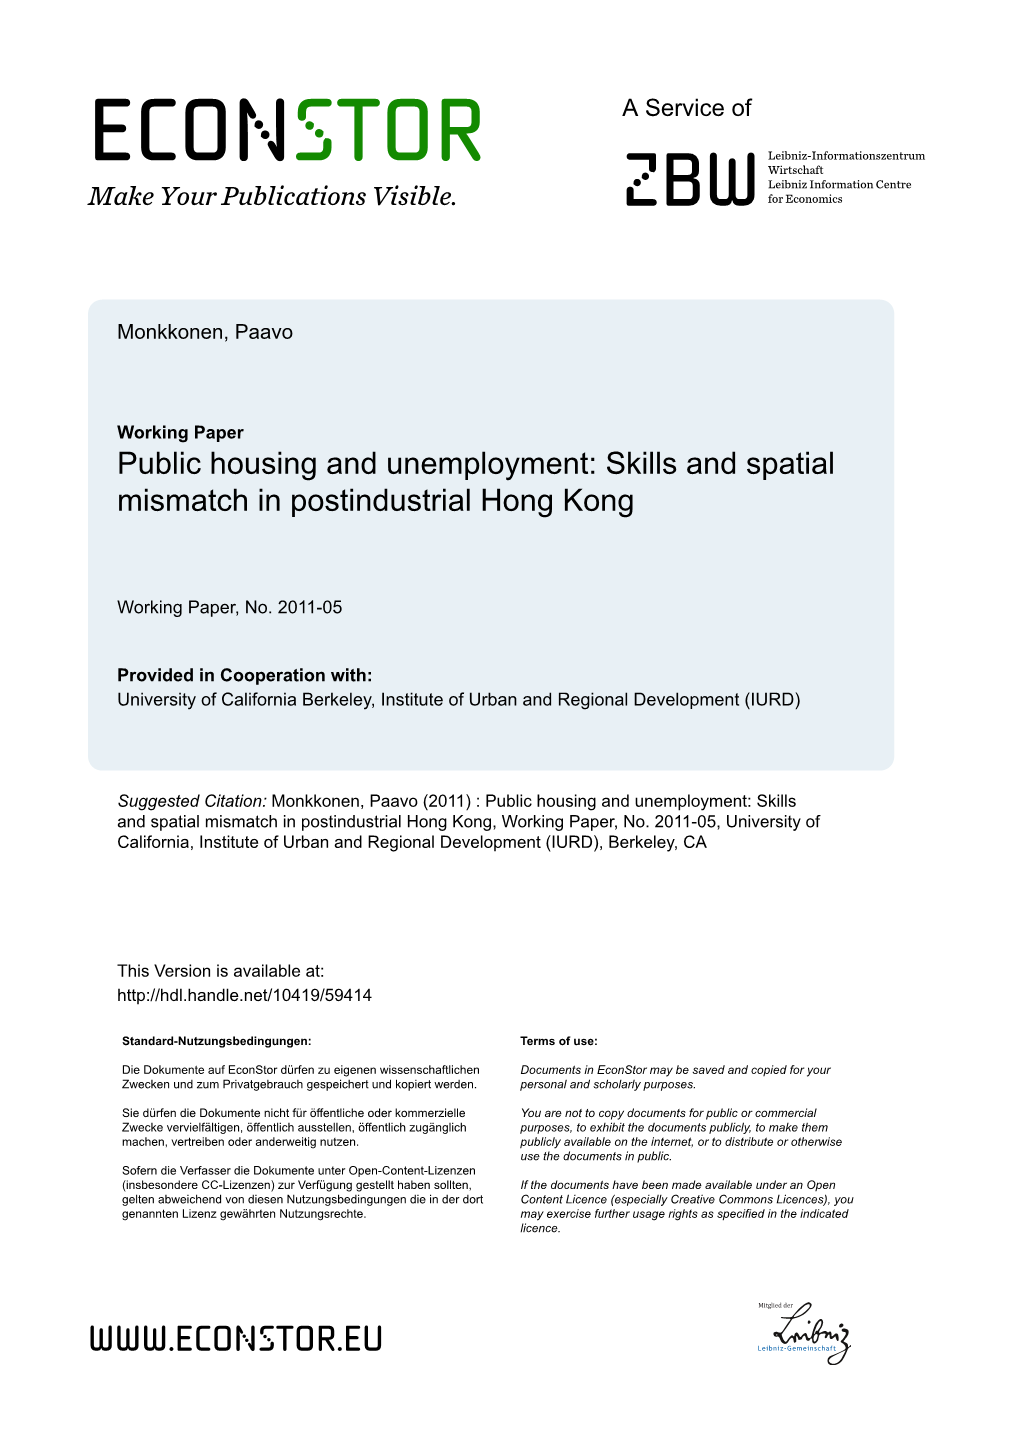 Public Housing and Unemployment: Skills and Spatial Mismatch in Postindustrial Hong Kong